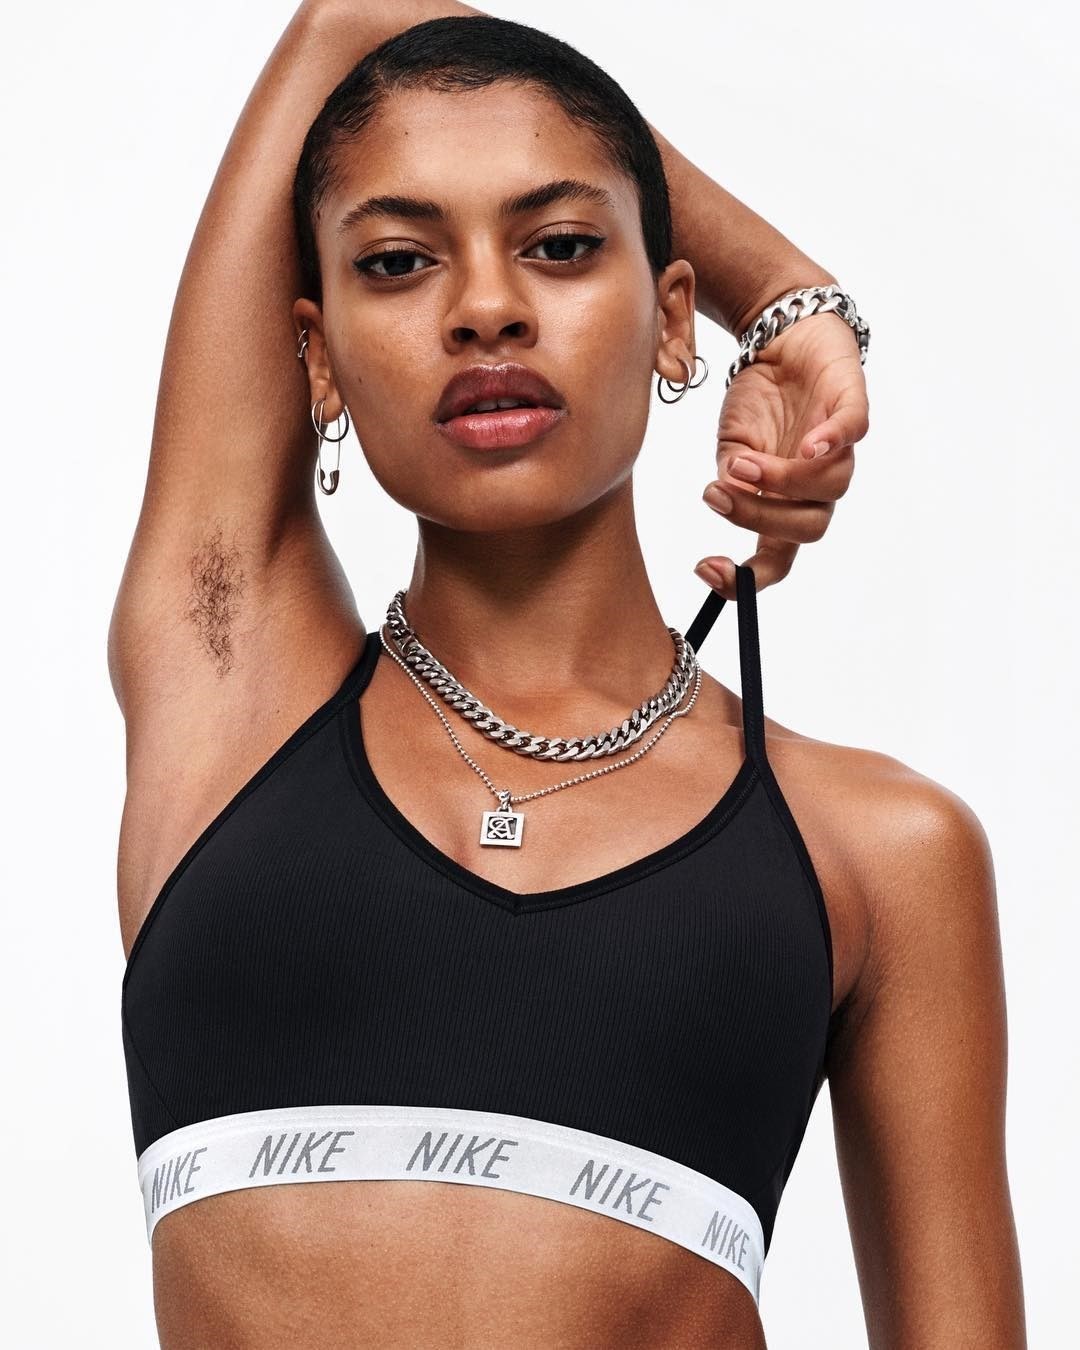 11 female celebrities with armpit hair proudly on display  Glamour UK